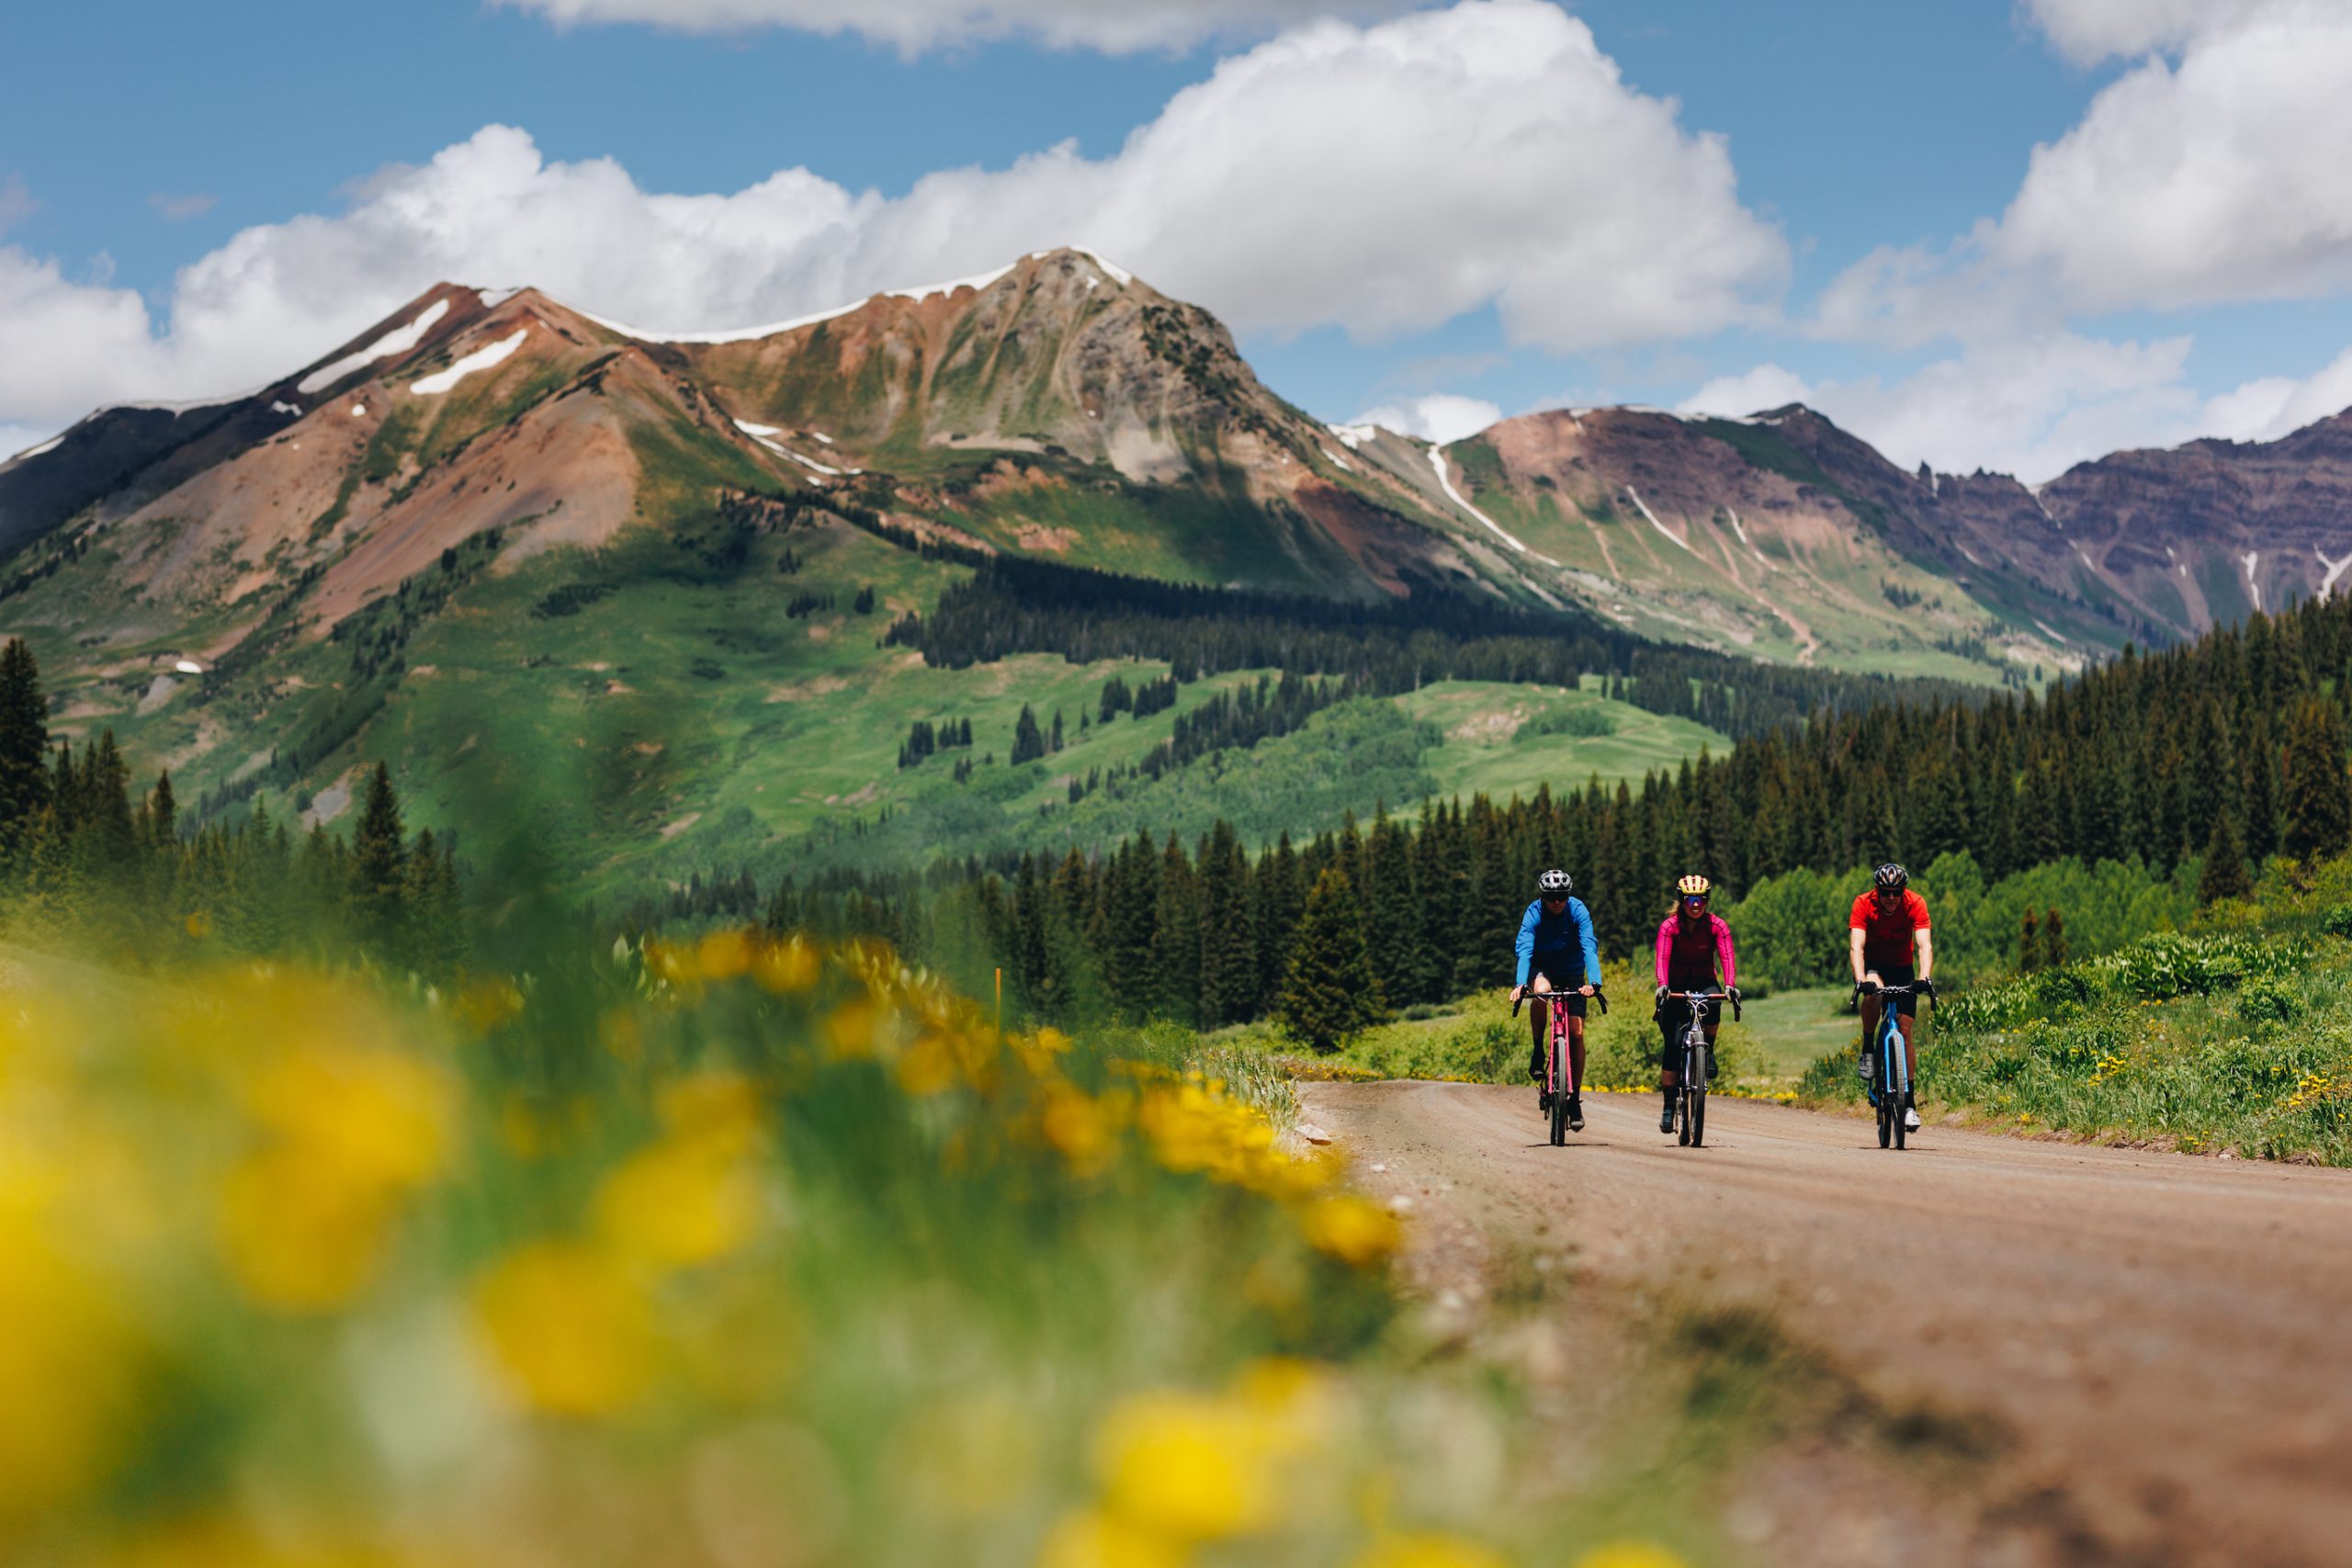 Three people gravel biking in Crested Butte, Colorado on a dirt road with wildflowers in the foreground and mountain peaks in the background.